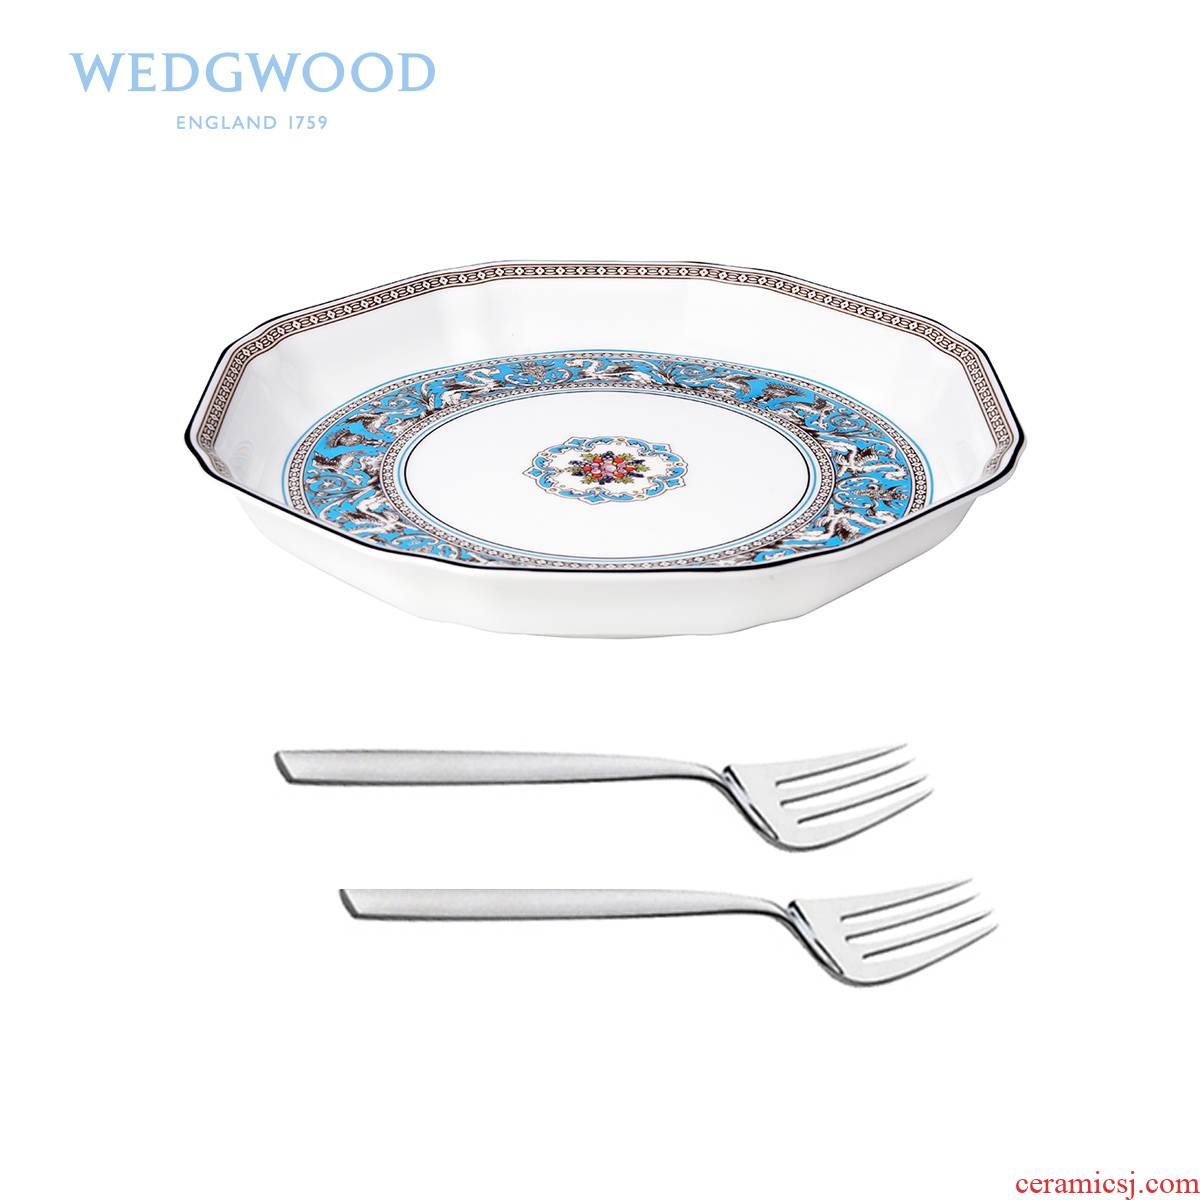 Wedgwood Florentine fiorentina retro anise fruit fork plate + 2 only ipads porcelain snack plate